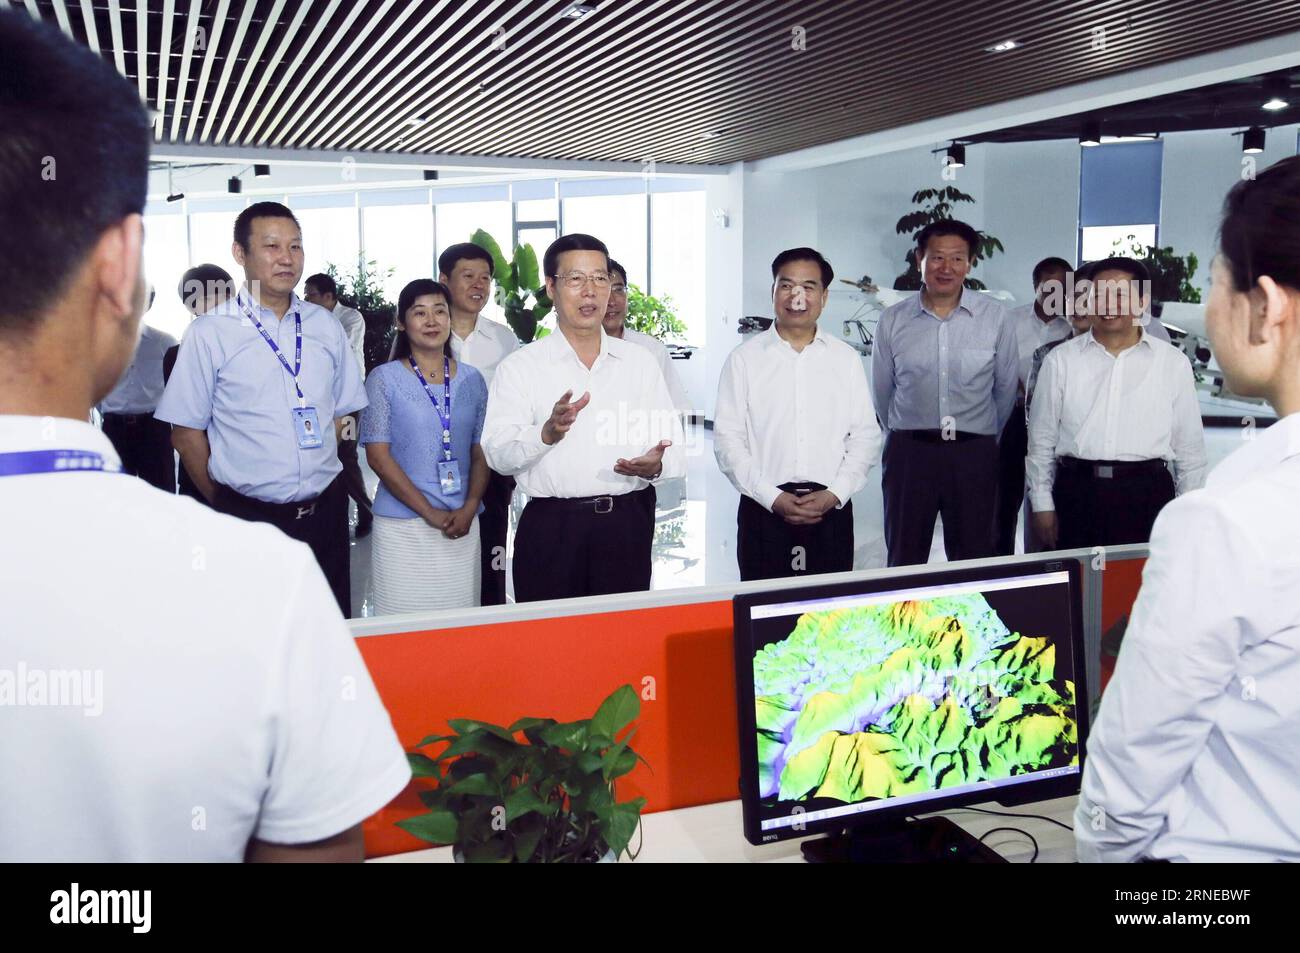 Chinese Vice Premier Zhang Gaoli (C) talks with staff members of the Maptech Inc. at Shenyang International Software Park in Shenyang, capital of northeast China s Liaoning Province, June 16, 2016. During a visit to Liaoning Province from June 16 to 17, Zhang urged local governments in China s northeastern region to revitalize the old industrial base. ) (zhs) CHINA-ZHANG GAOLI-LIAONING-REVITALIZATION (CN) JuxPeng PUBLICATIONxNOTxINxCHN   Chinese Vice Premier Zhang Gaoli C Talks With Staff Members of The  INC AT Shenyang International Software Park in Shenyang Capital of Northeast China S Liaon Stock Photo